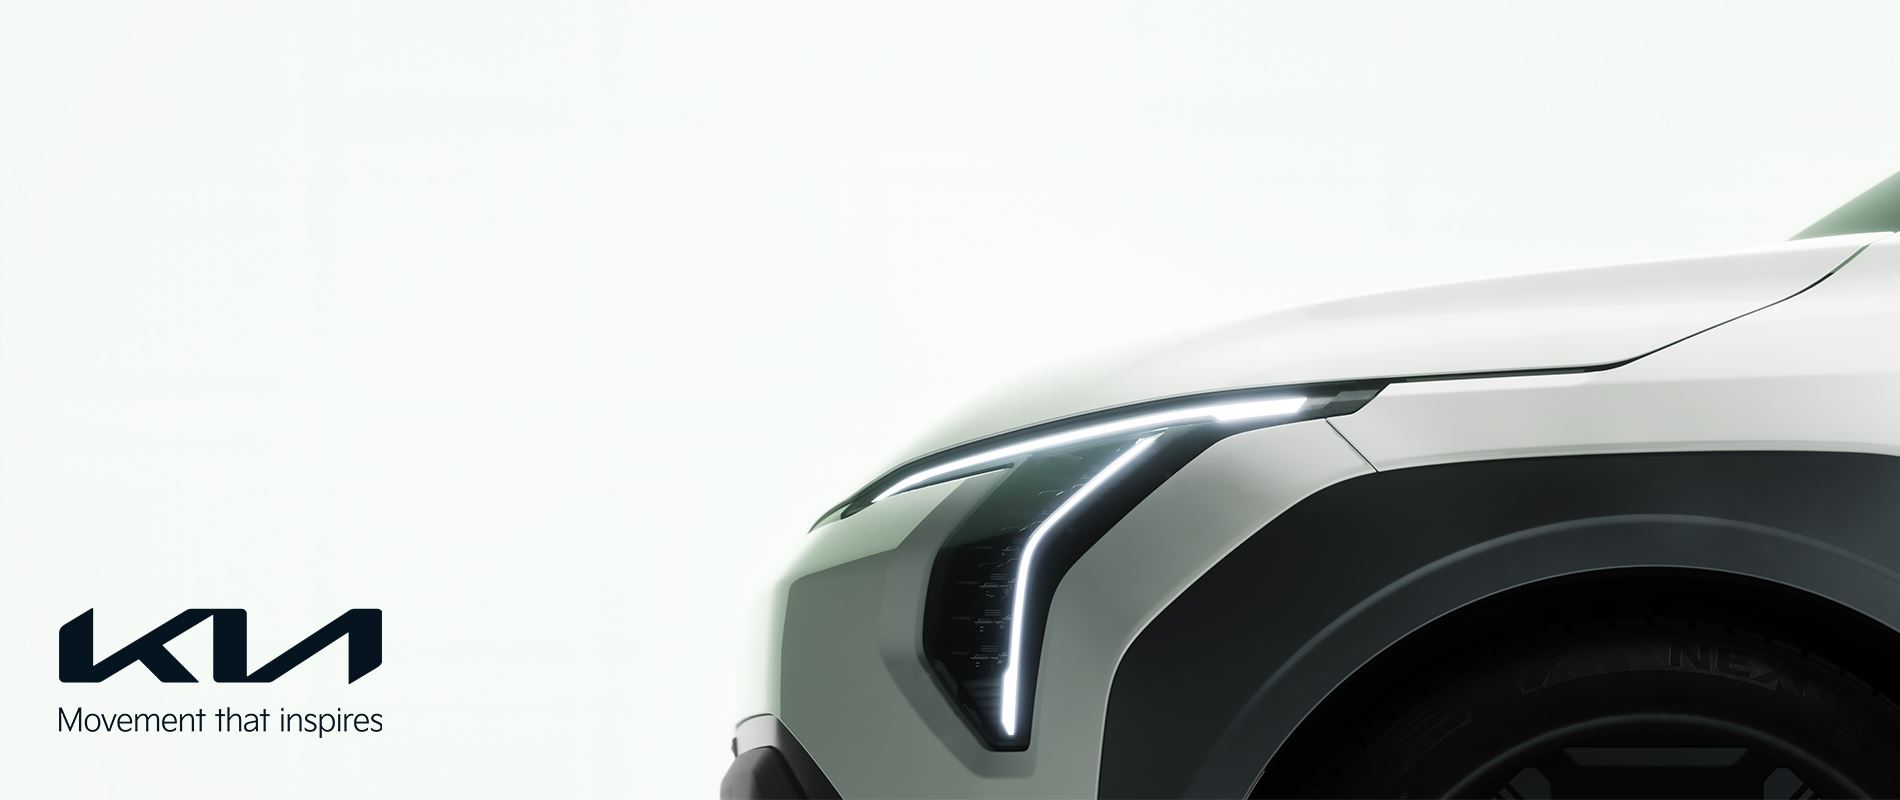 Kia teases new EV3 compact electric SUV combining EV accessibility and robust design